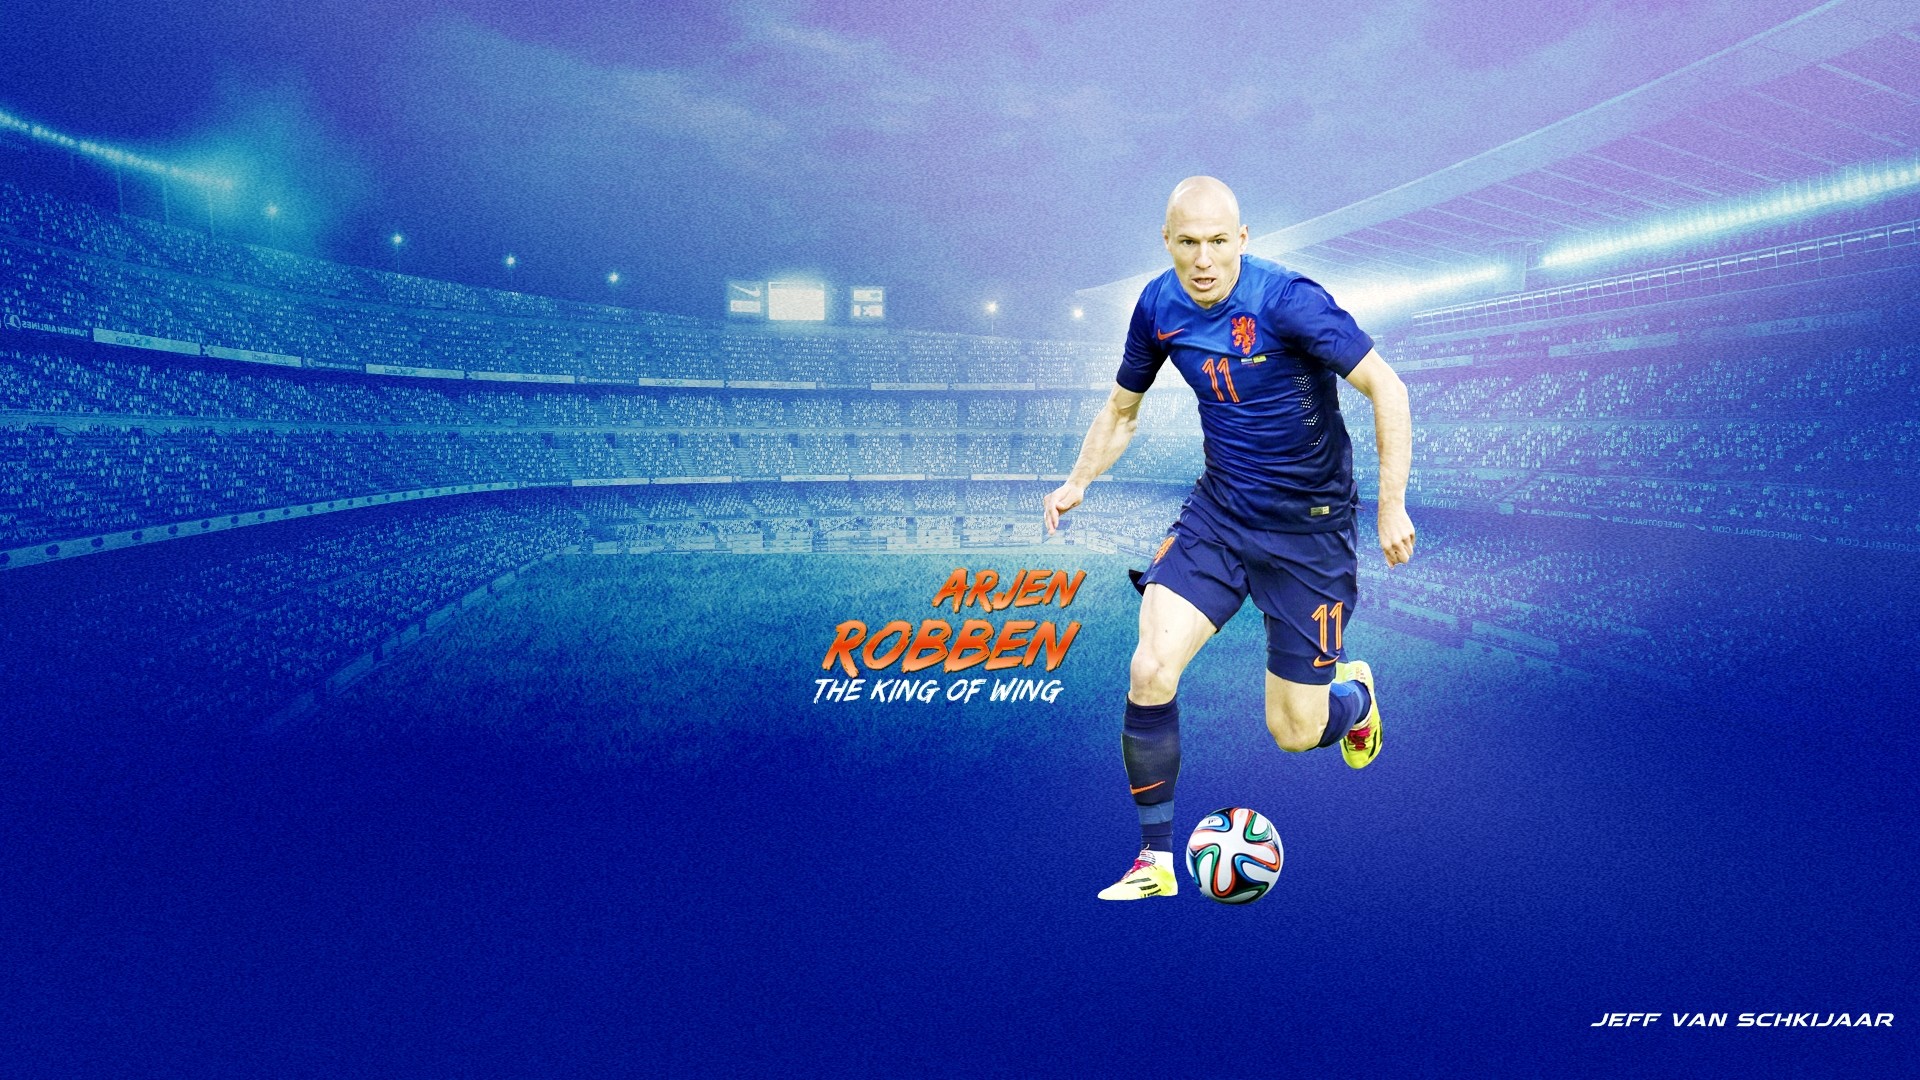 1920x1080 Fifa world cup holland team wallpapers hd ...